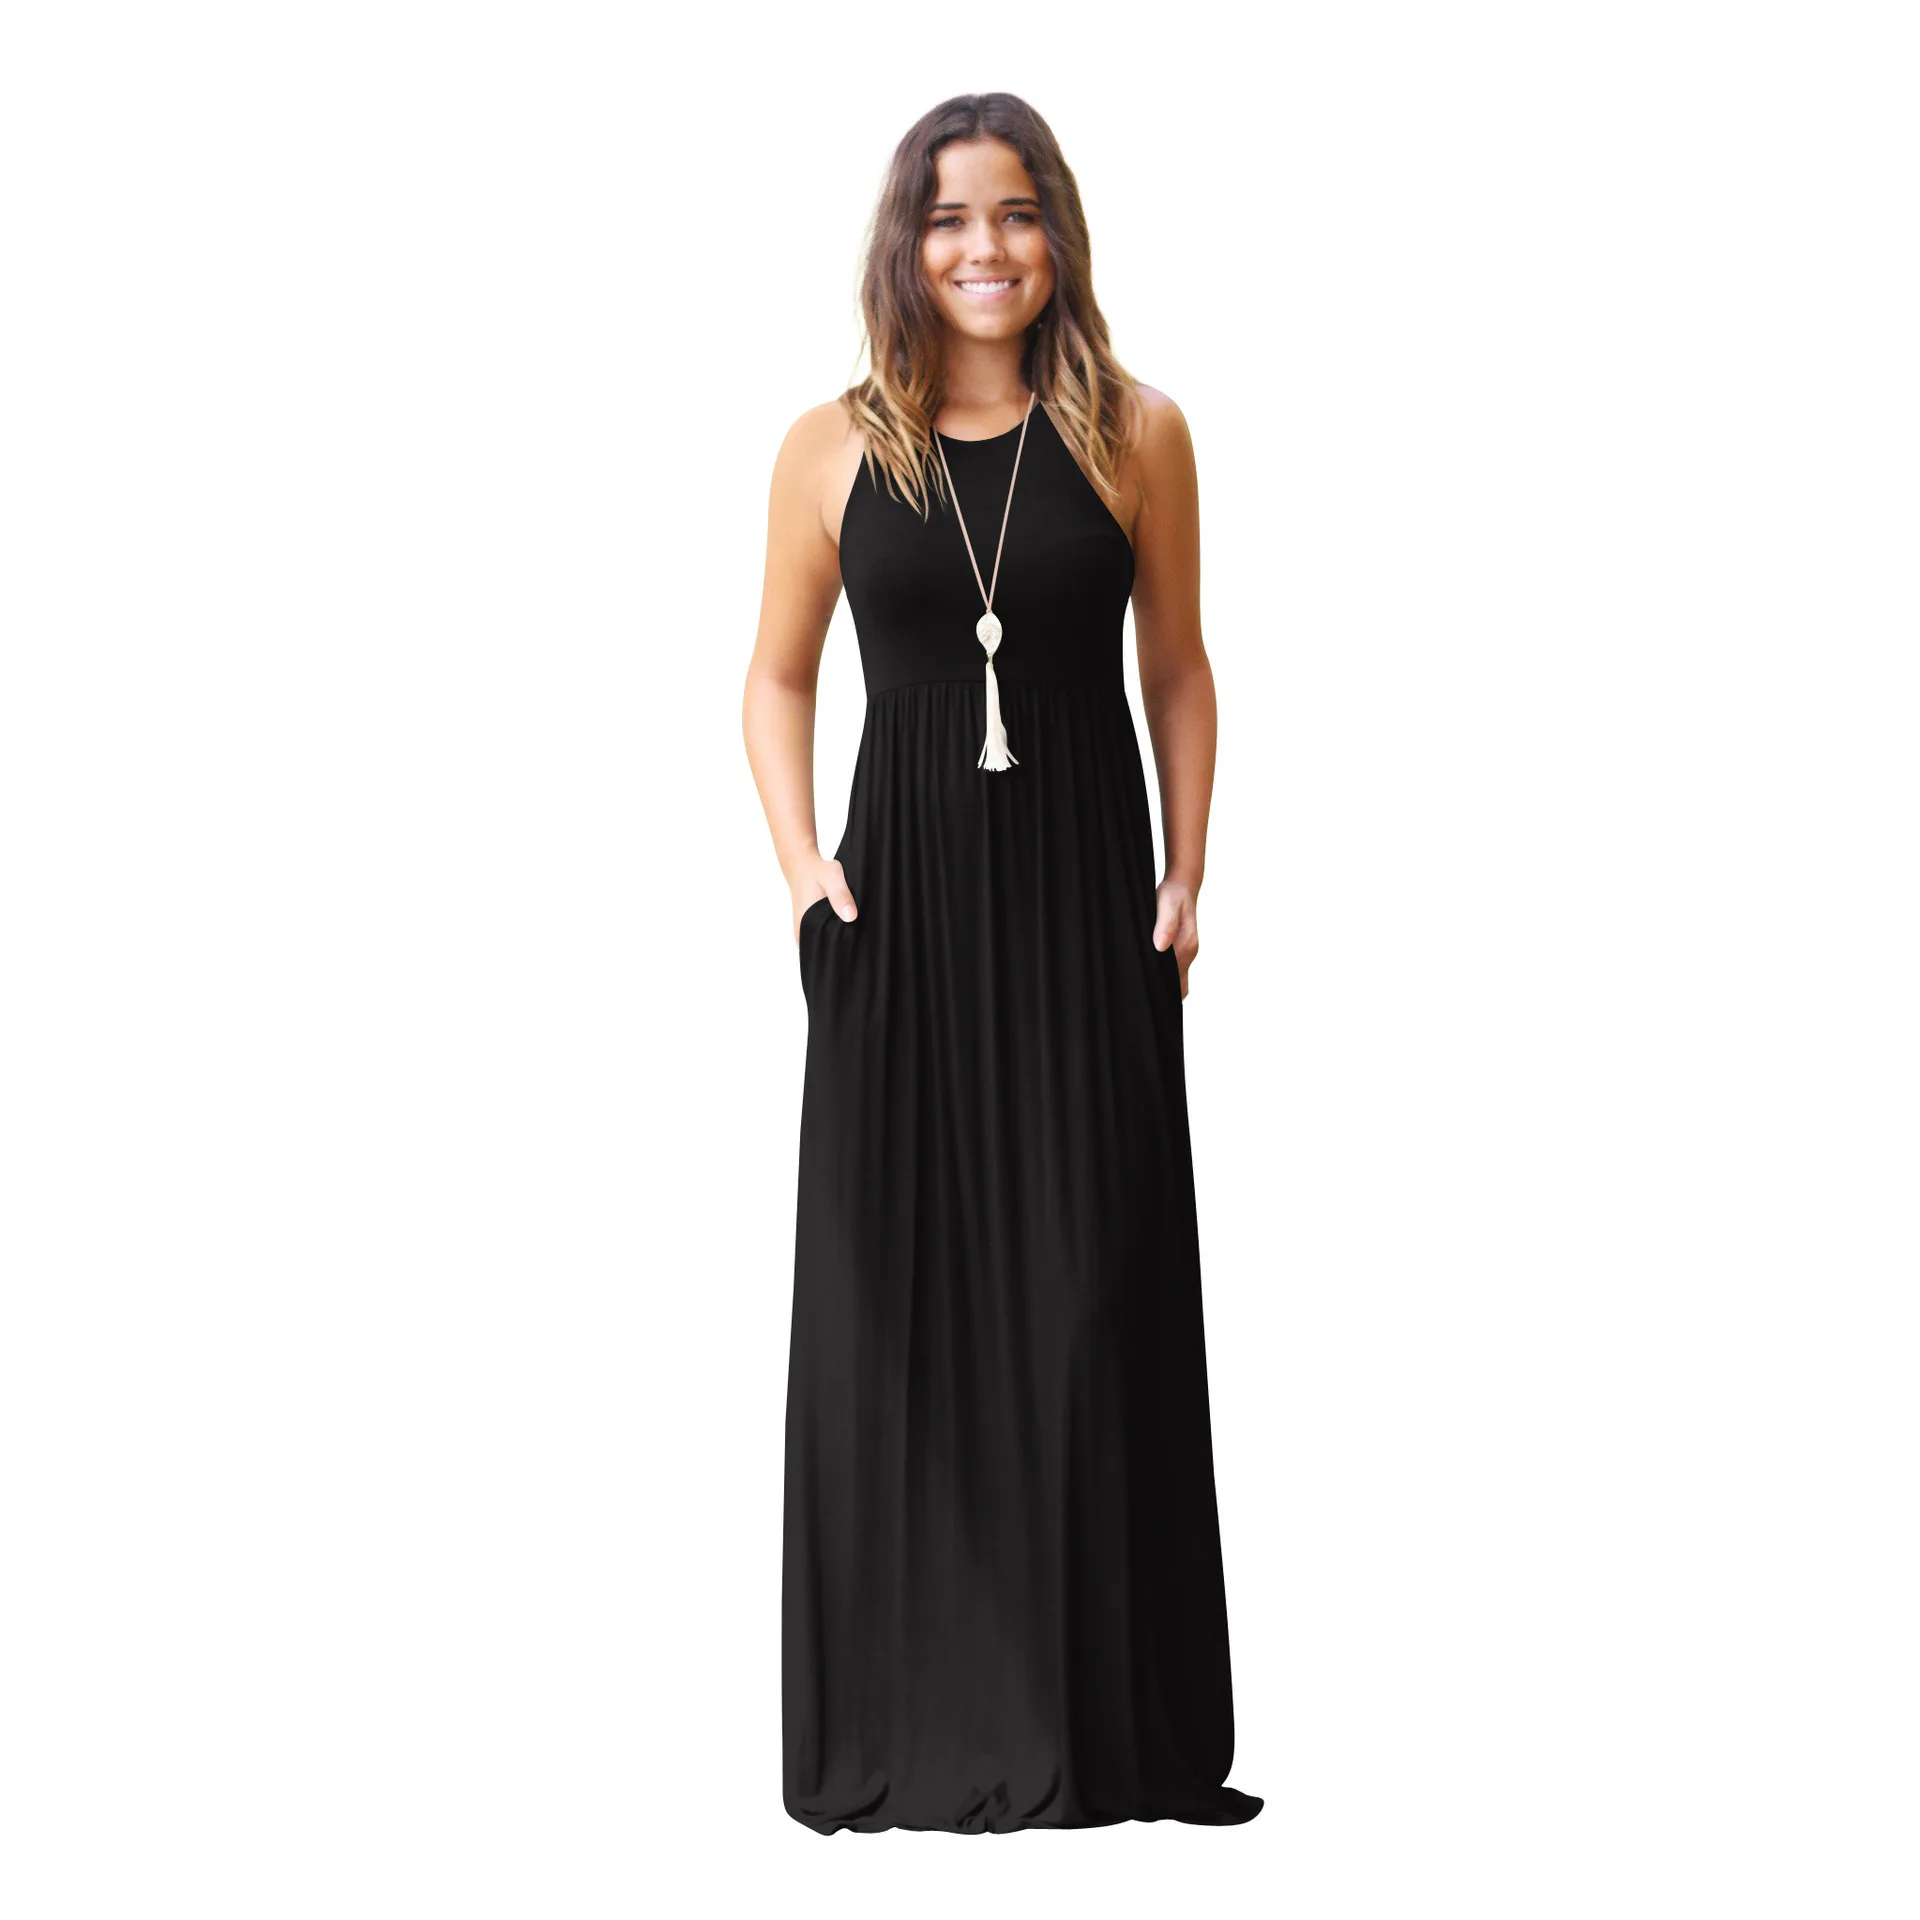 Women's Sleeveless Racerback And Long Sleeve Loose Plain Maxi Dresses Casual  Long Dresses With Pockets - Buy Woman Dress,Sleeveless Dress,Casual Long  Dresses Product on Alibaba.com